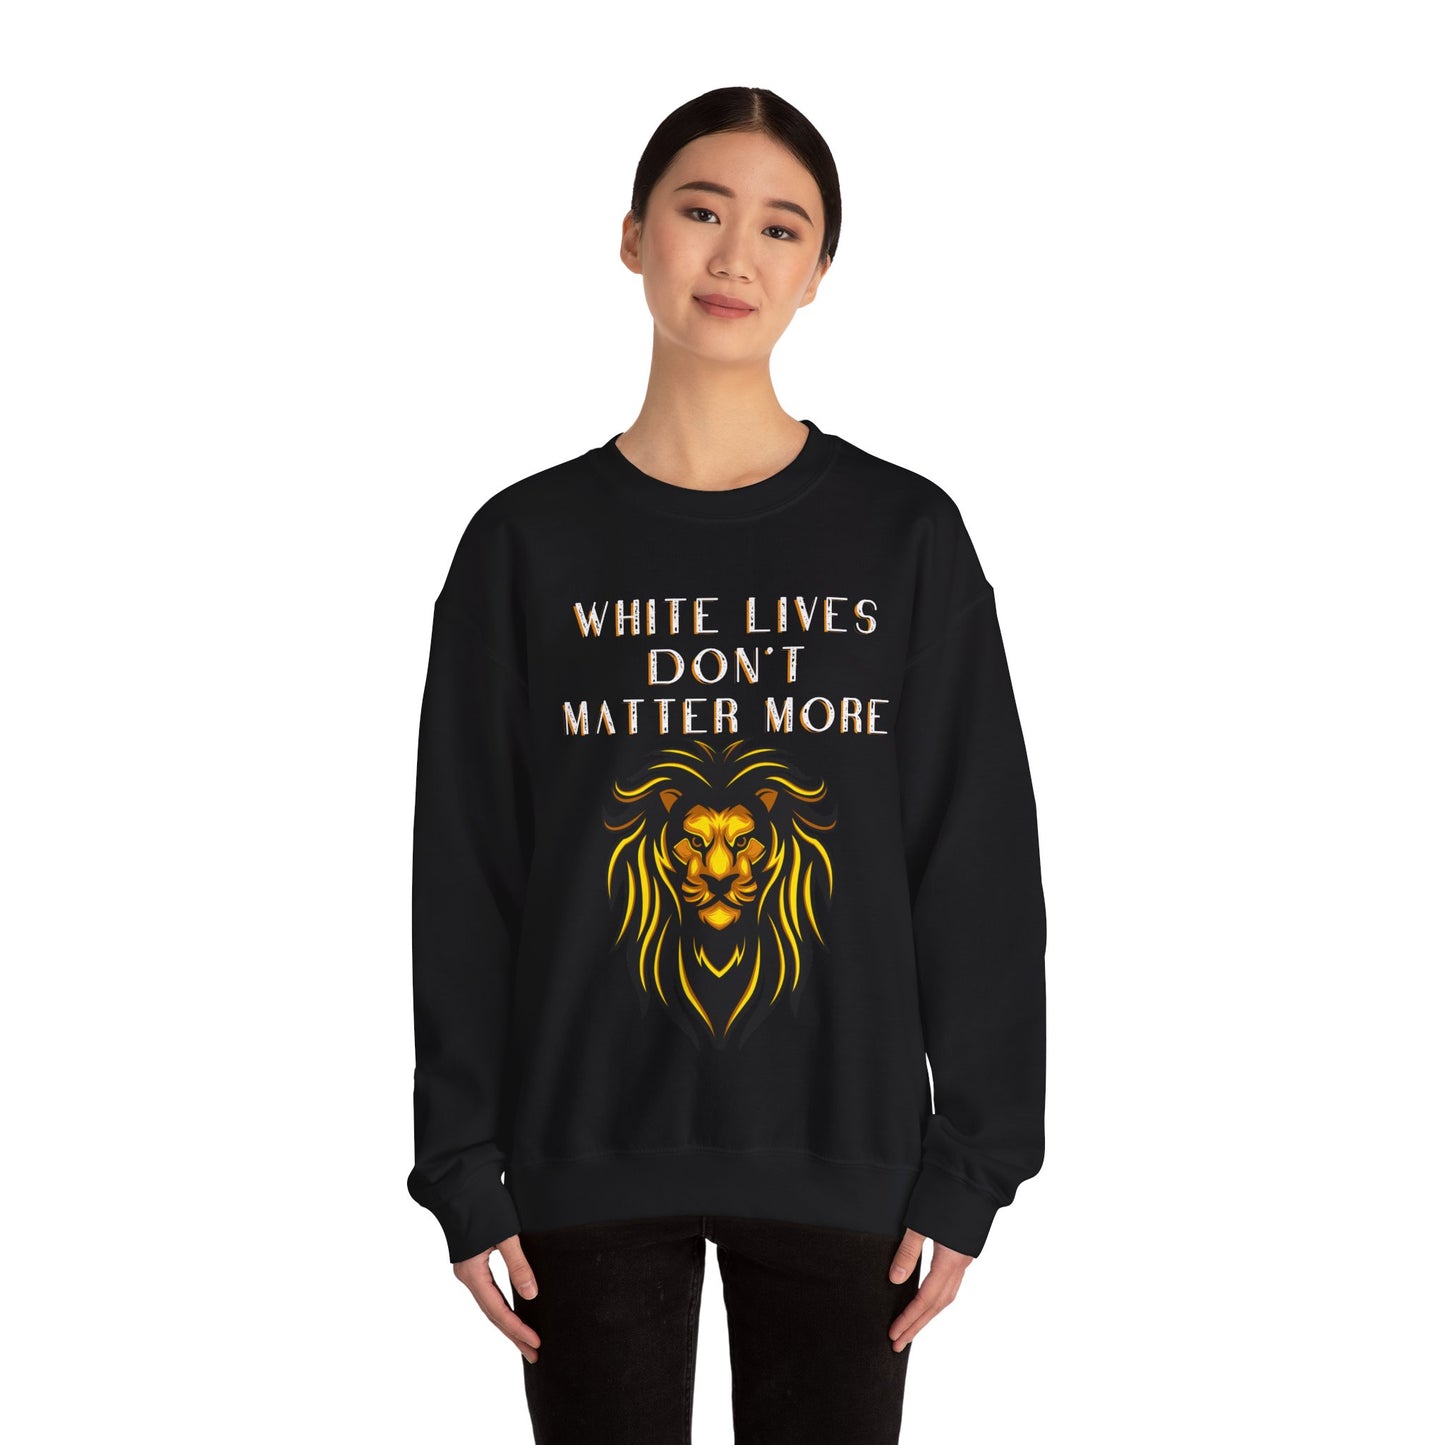 "White Lives Don't Matter More" Crewneck Sweatshirt (Black, with Heavy Text & Graphic)